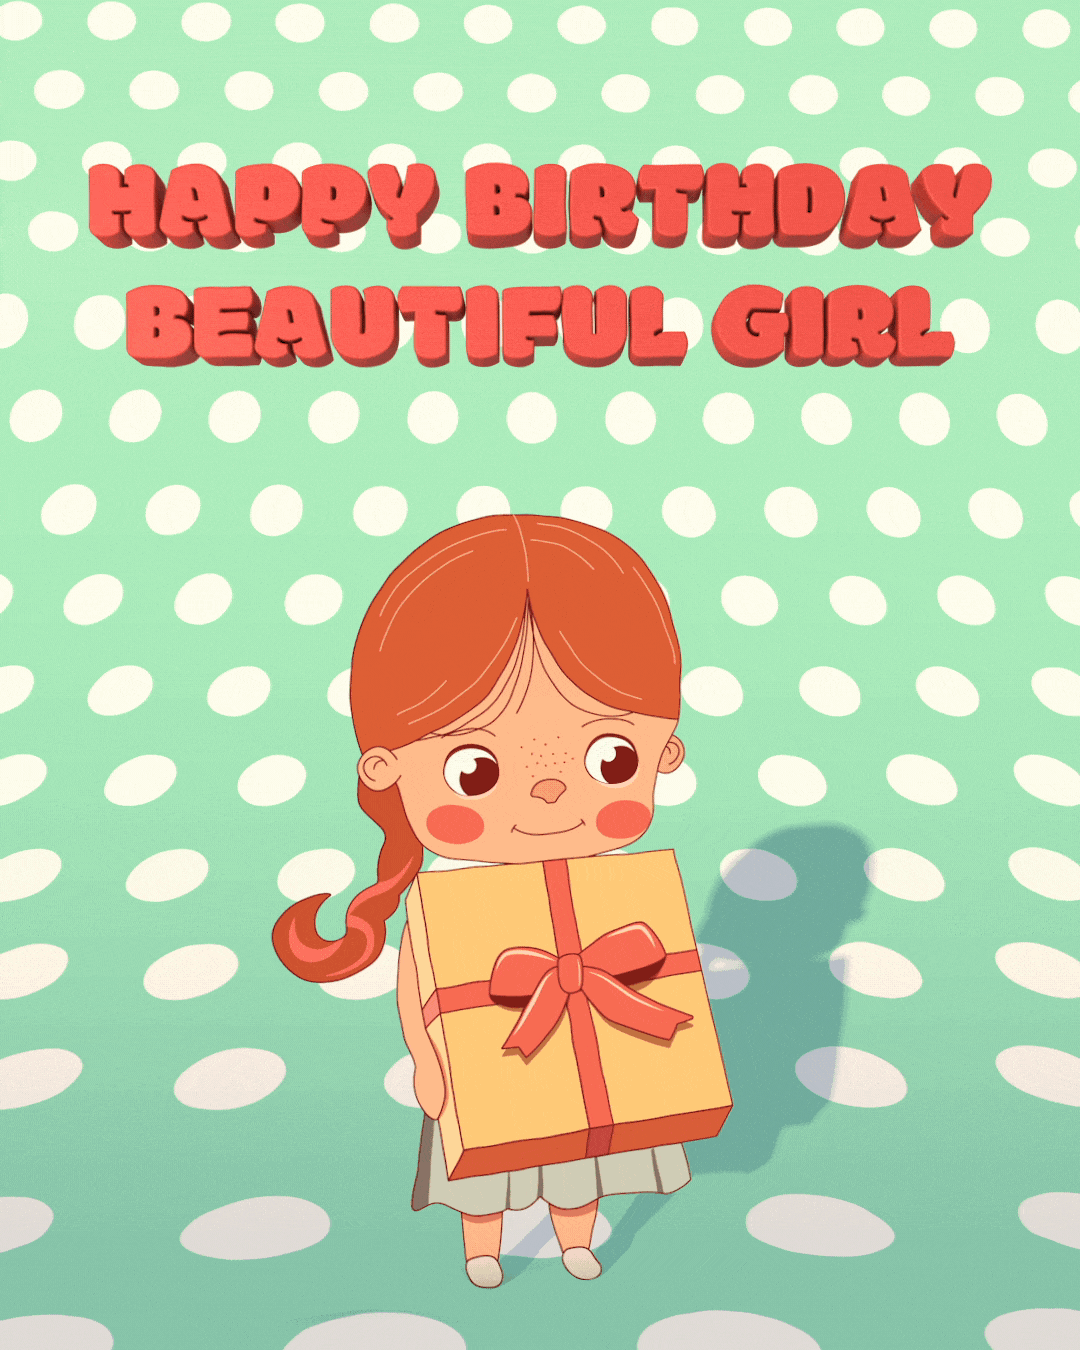 audie hall recommends happy birthday lovely lady gif pic